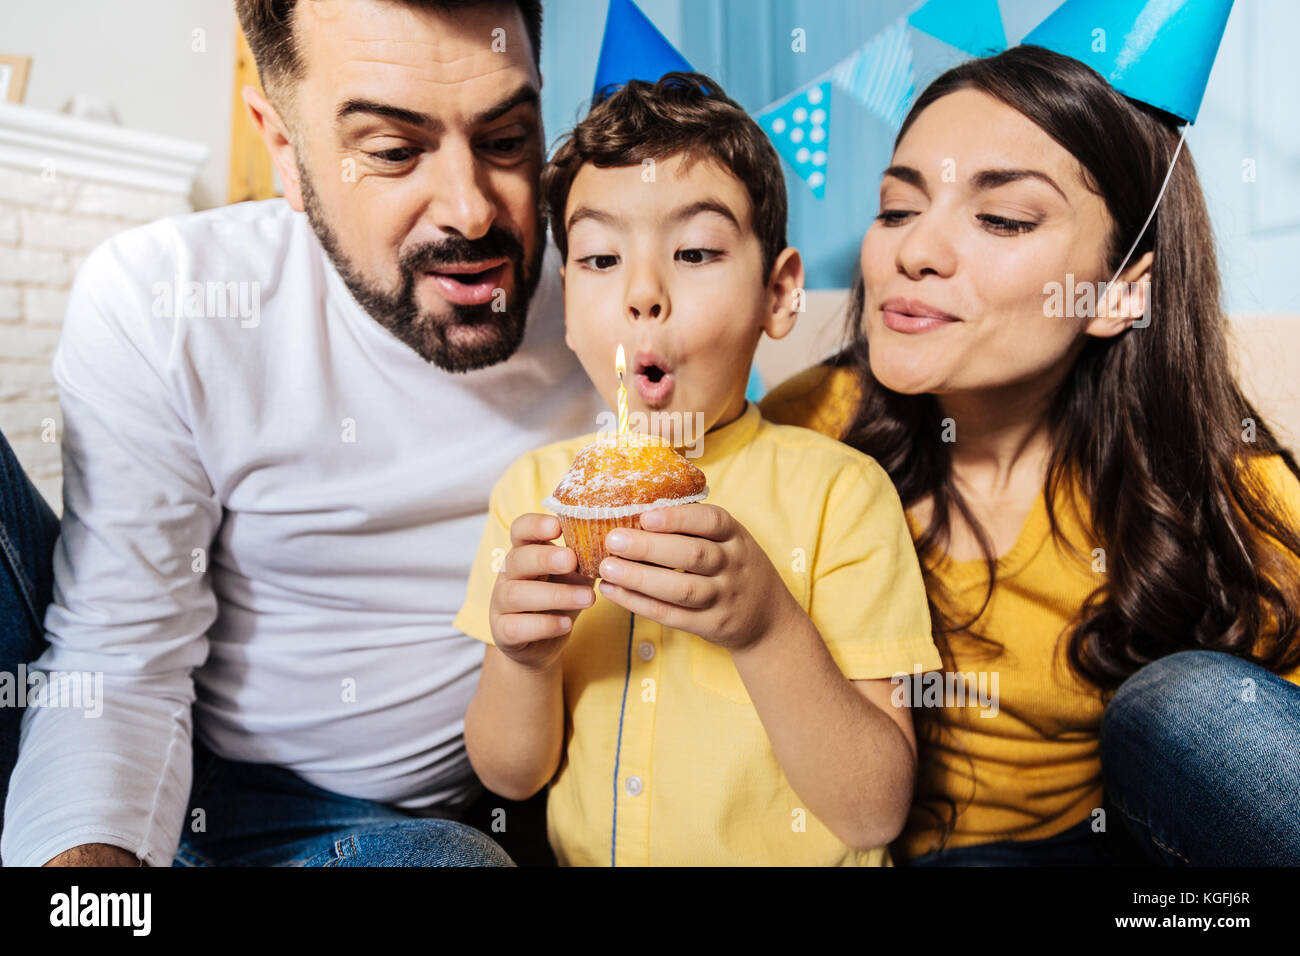 Happy family blowing out candle on birthday muffin together Stock Photo